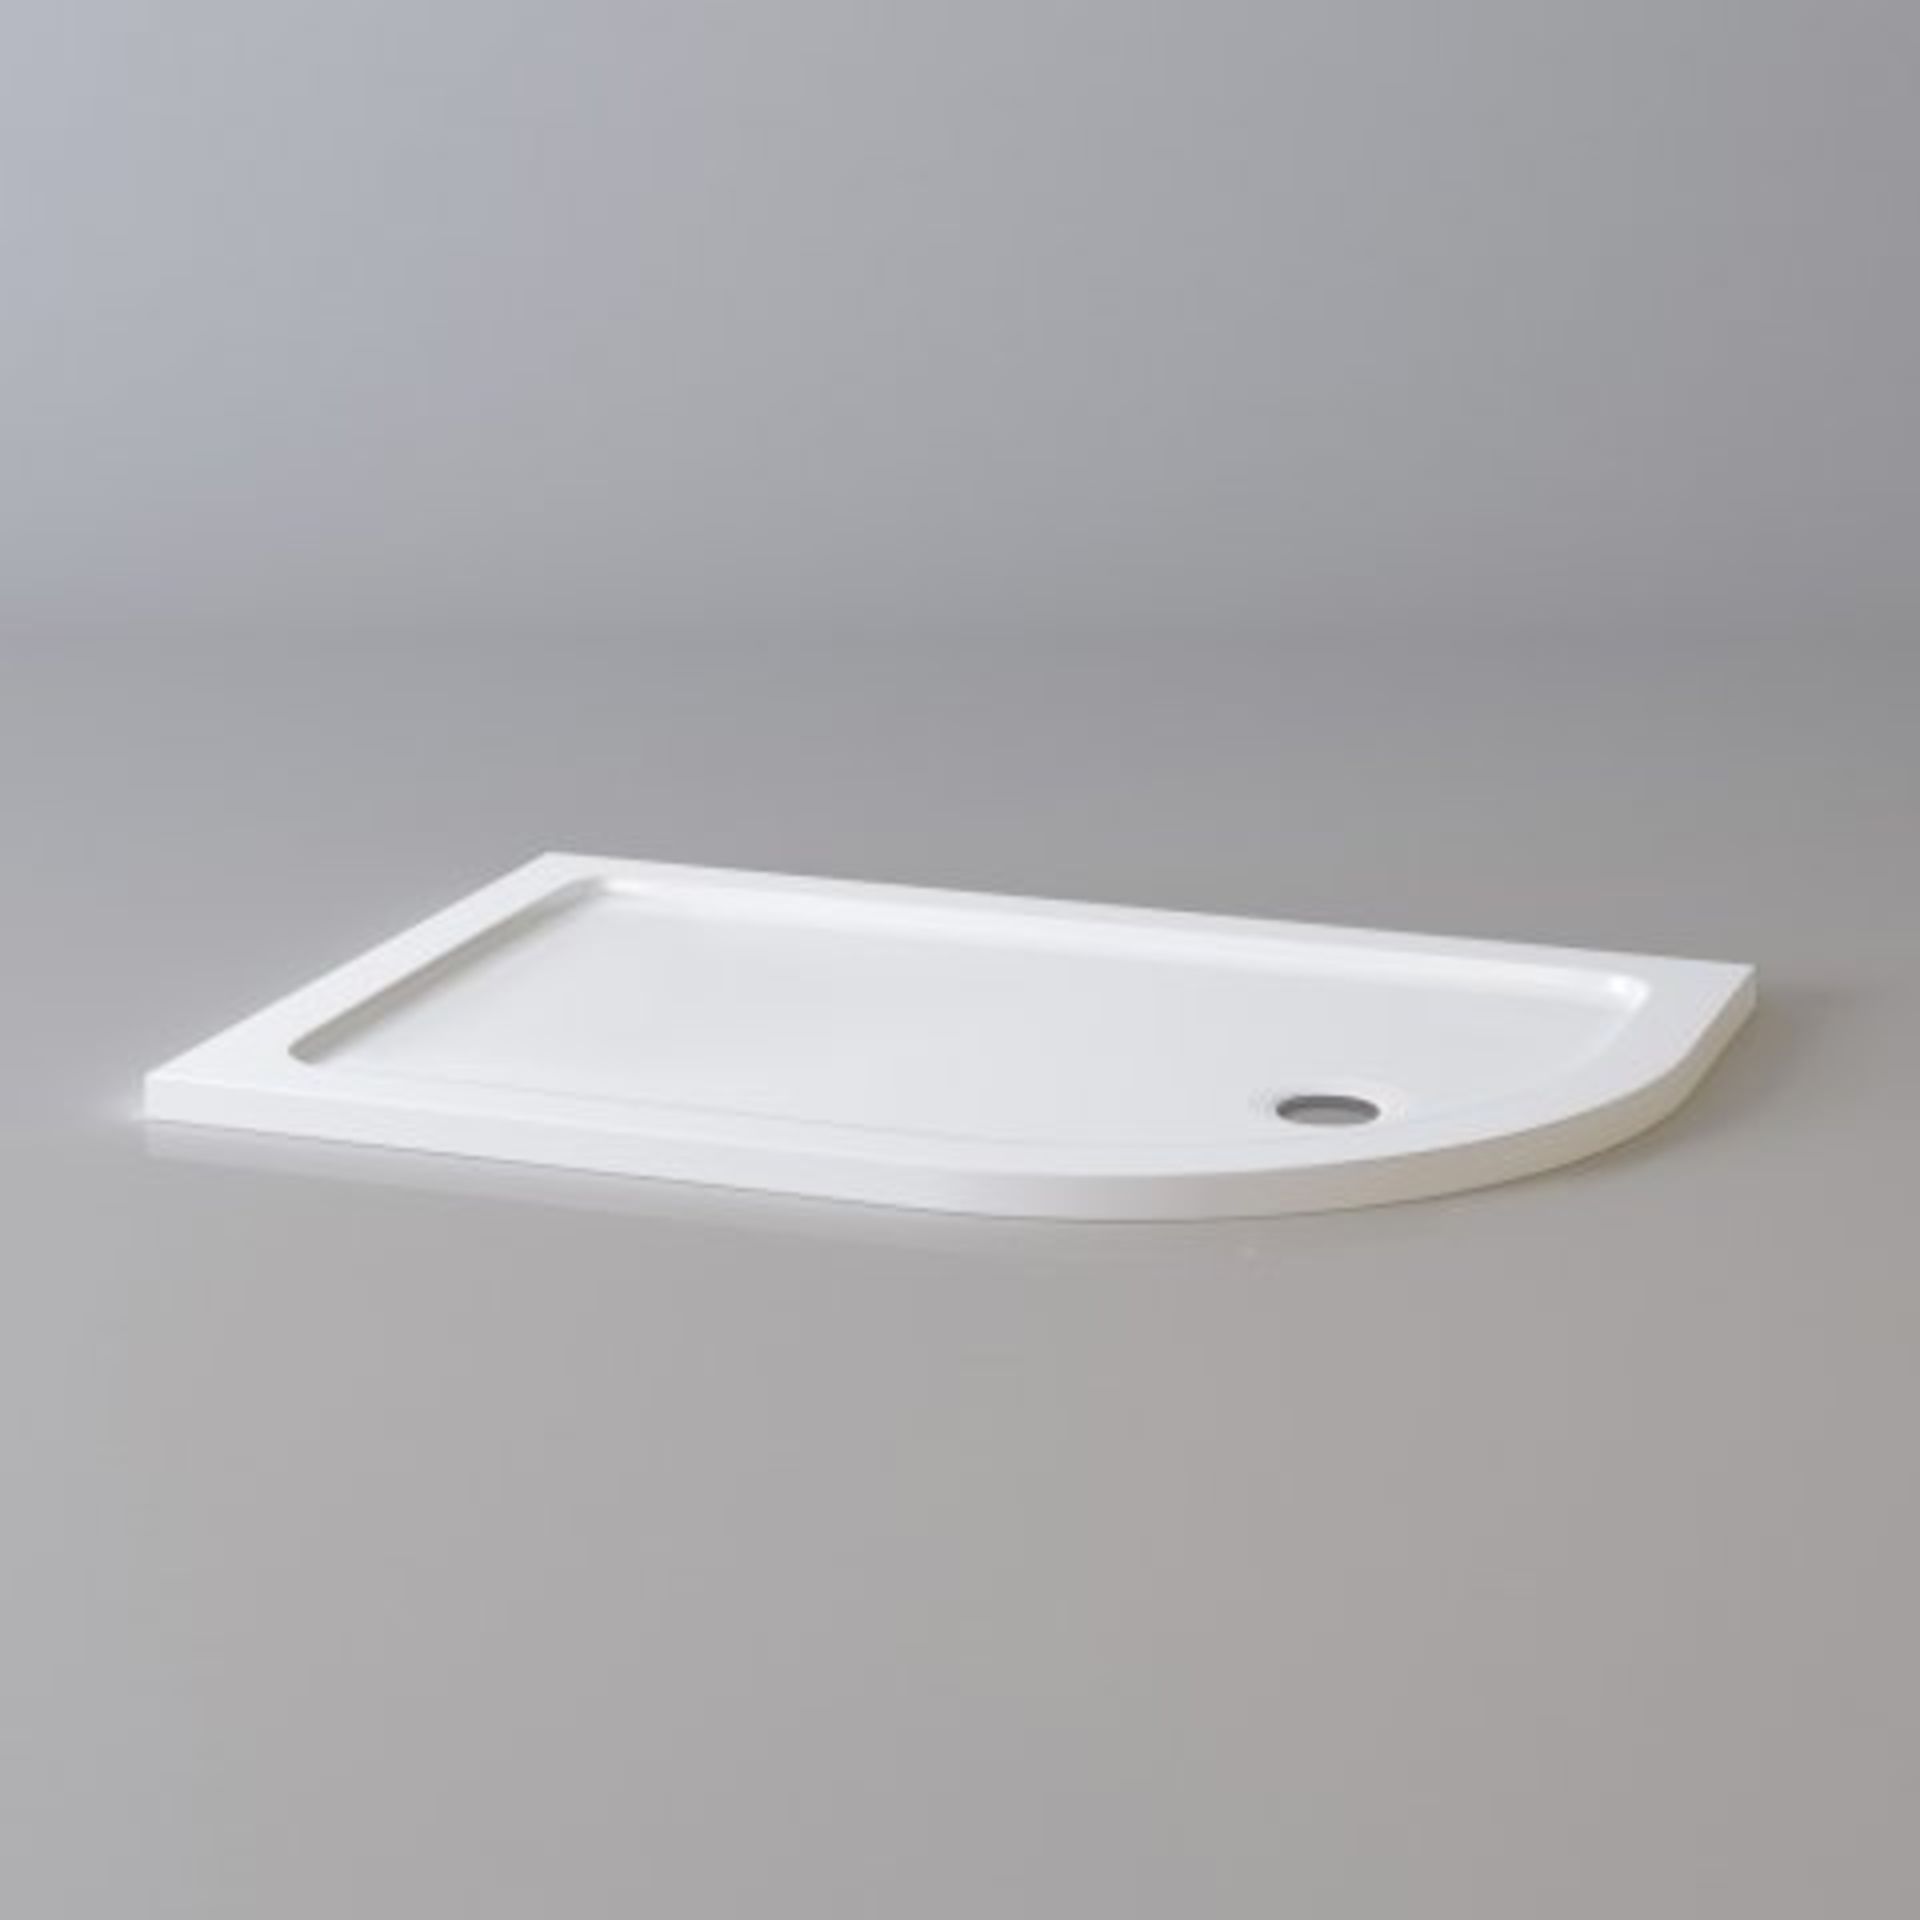 (T47) 1200x800mm Offset Quadrant Ultraslim Stone Shower Tray - Right. RRP £299.99. Magnificently